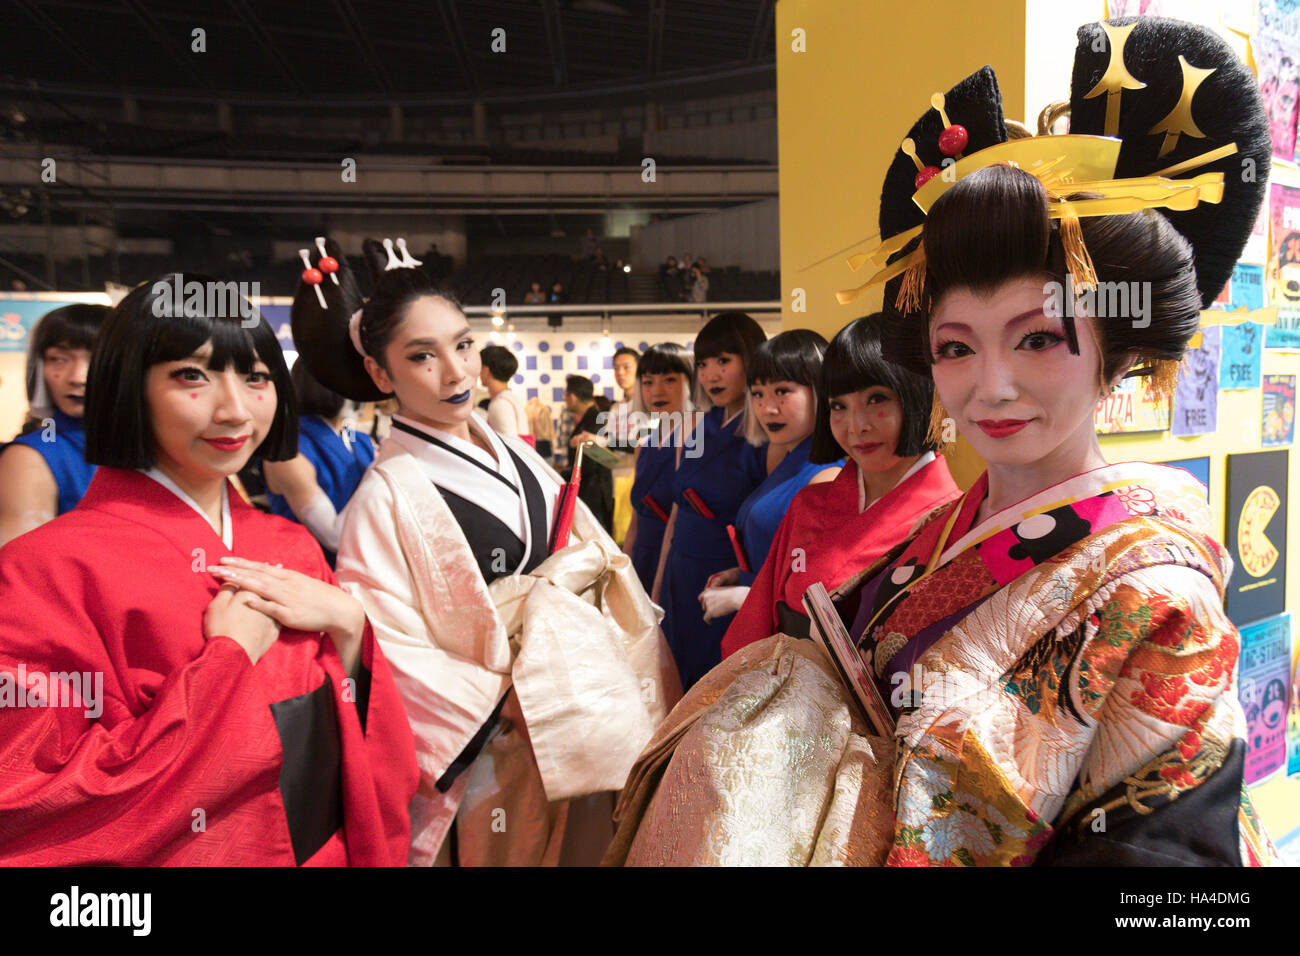 Dancers wearing traditional kimono pose for pictures during the Moshi Moshi  Nippon Festival 2016 on November 26, 2016 in Tokyo, Japan. Moshi Moshi  Nippon Festival 2016 aims to promote Japanese pop culture (